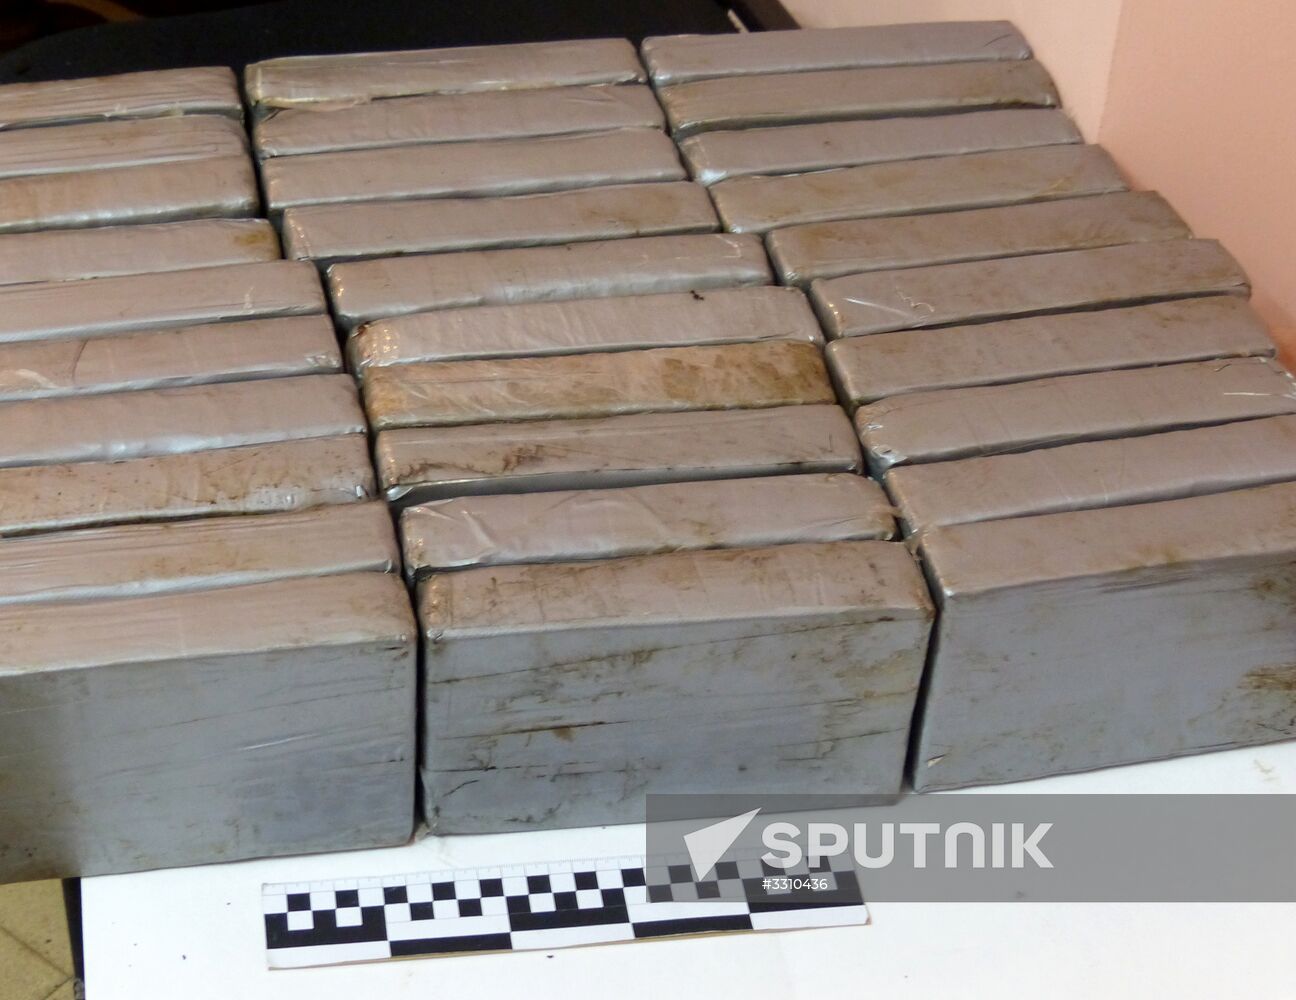 Russian, Argentian special services disclose operation to foil cocaine trafficking